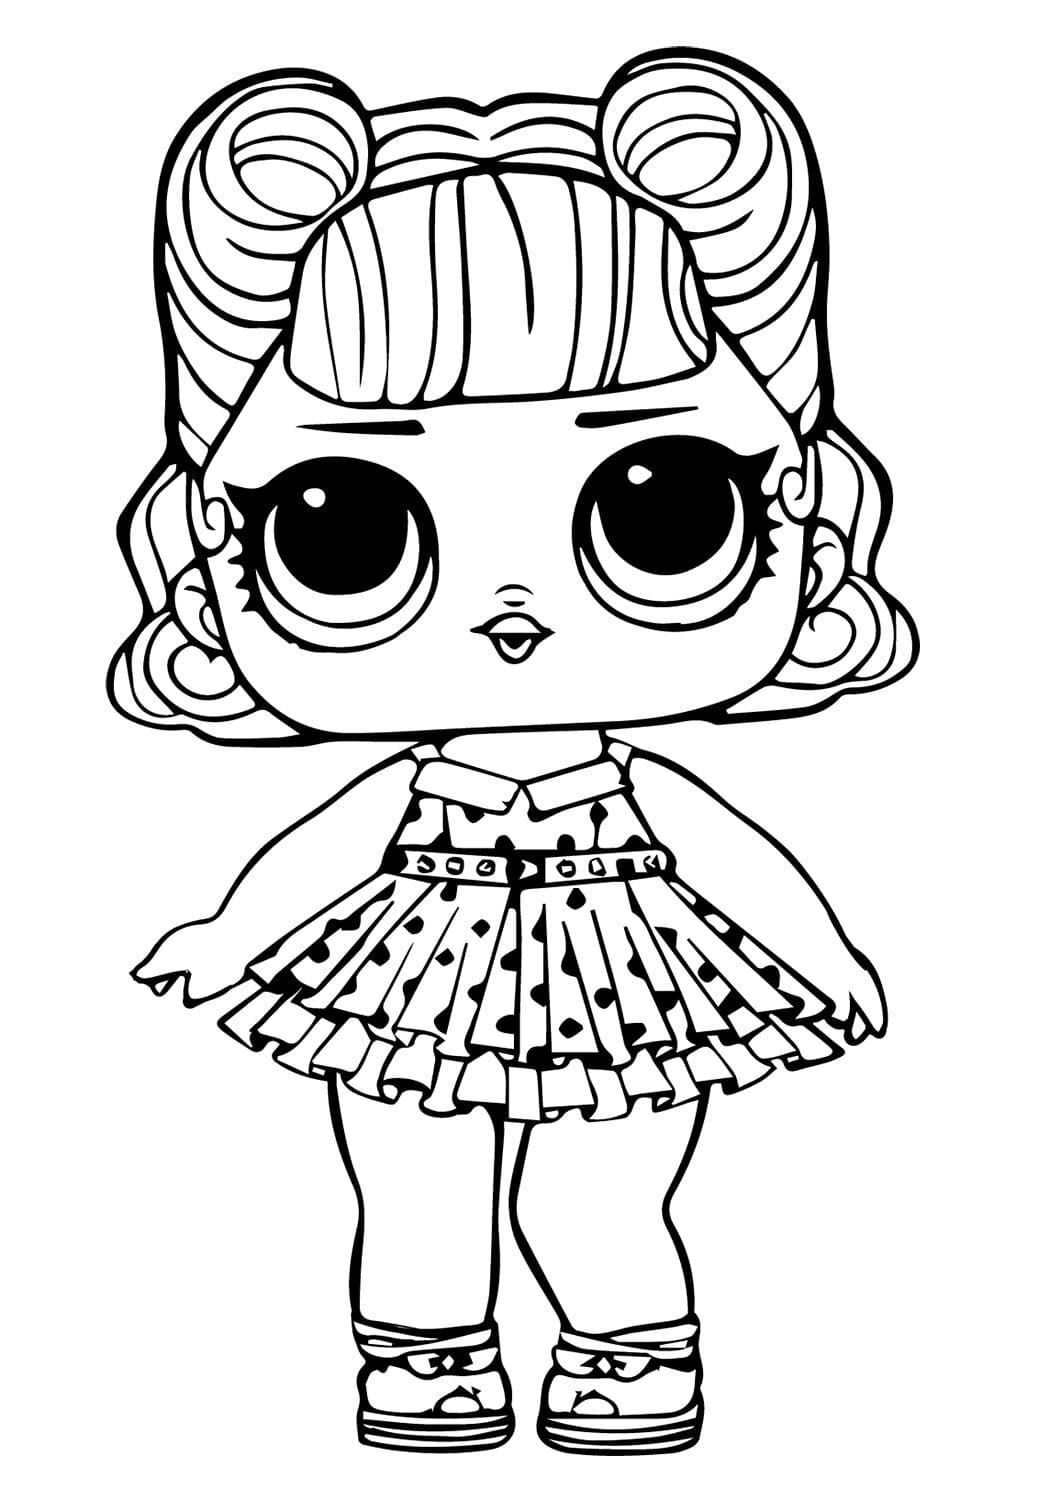 LOL Coloring Pages FREE Printable 82